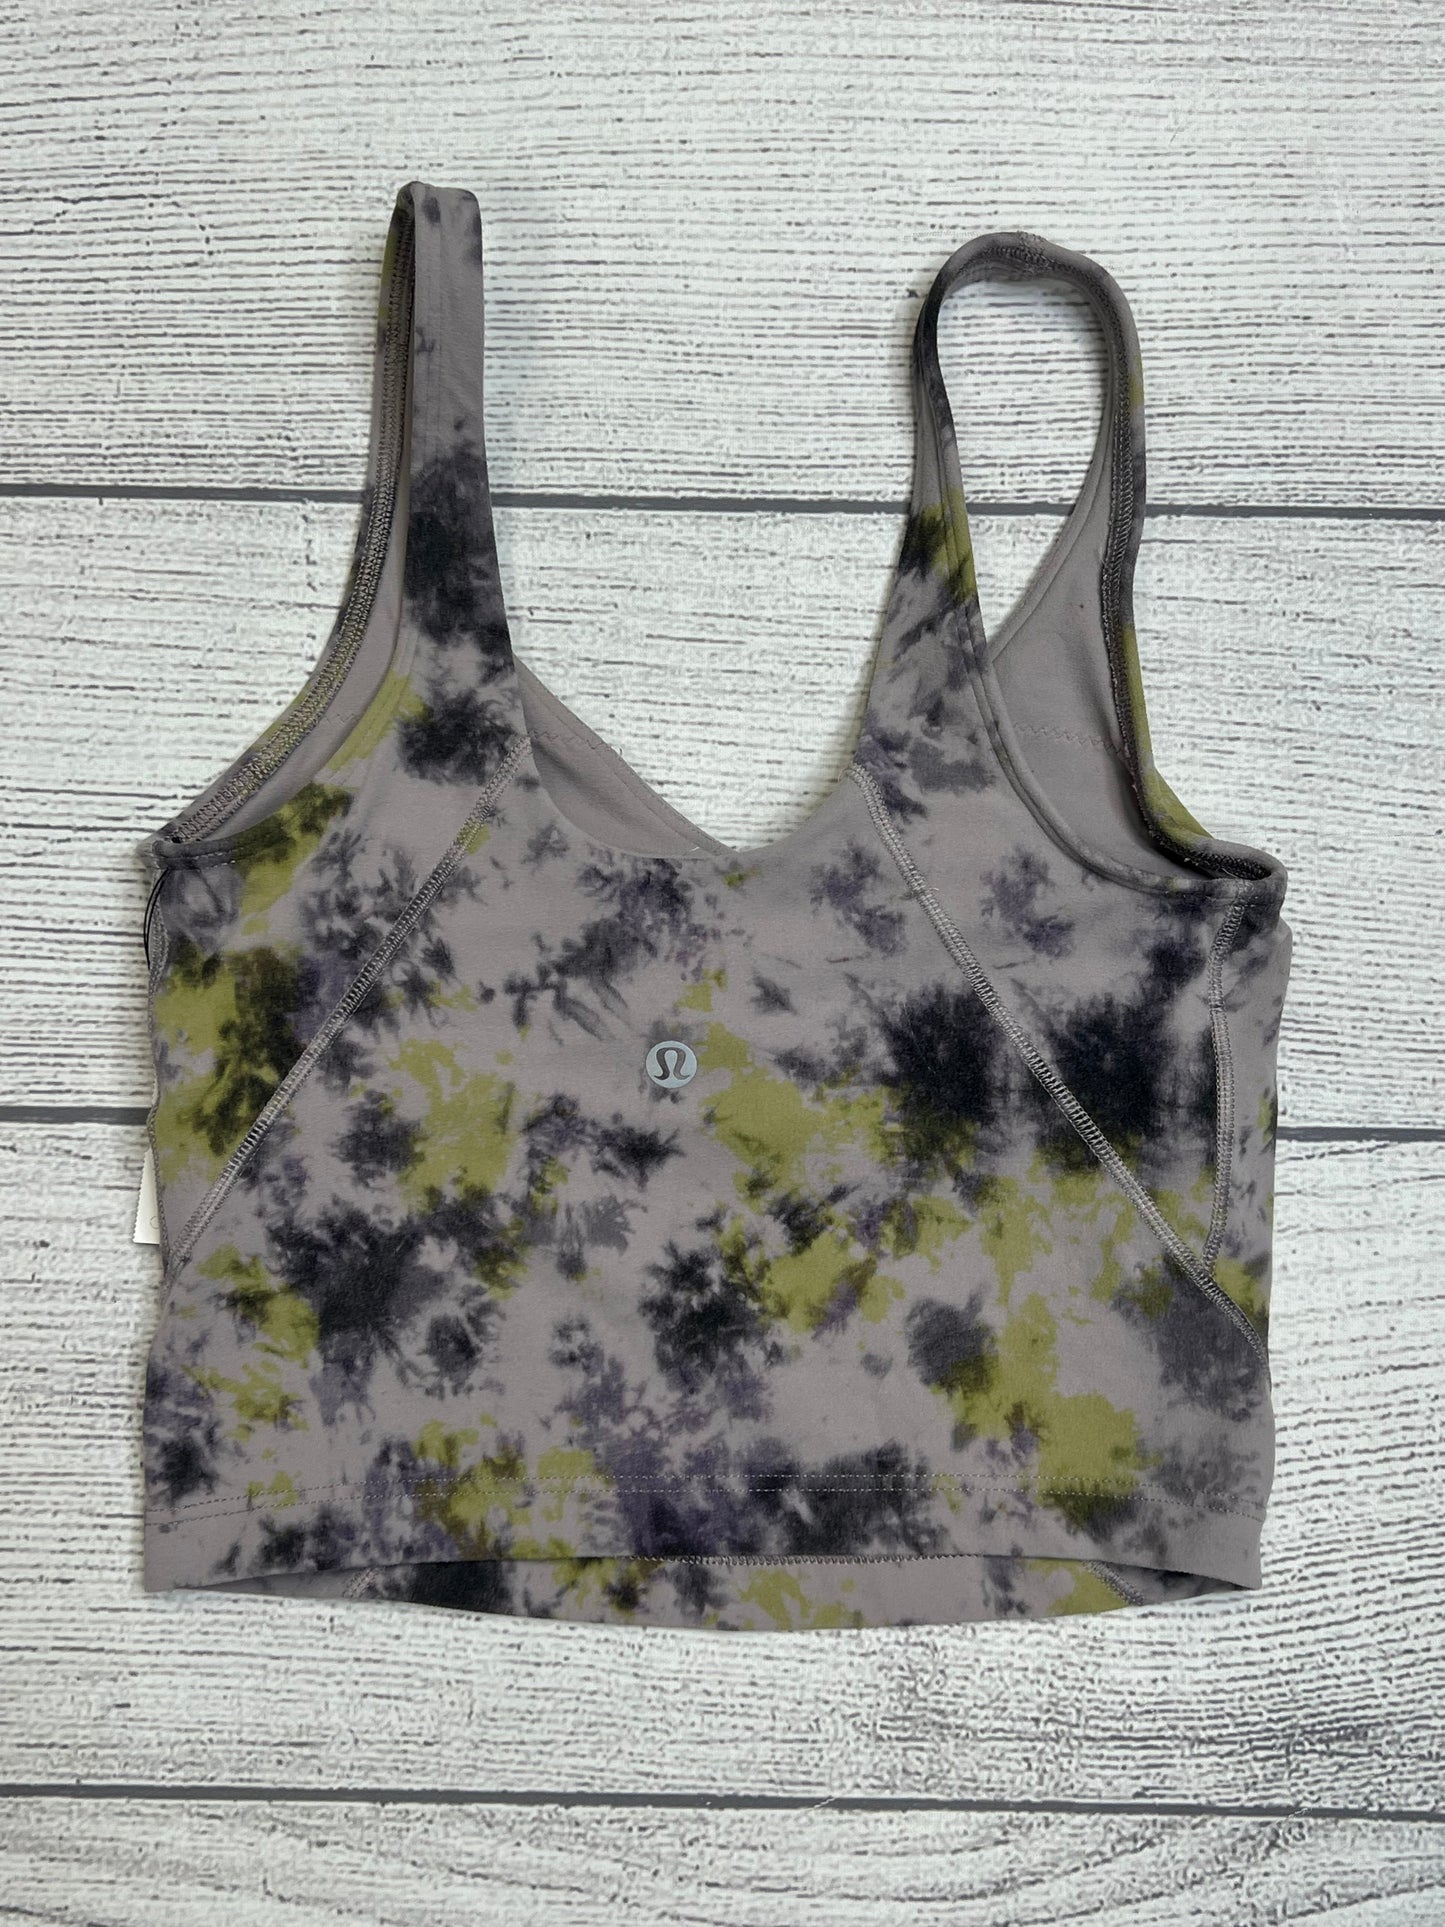 Athletic Tank Top By Lululemon  Size: 2